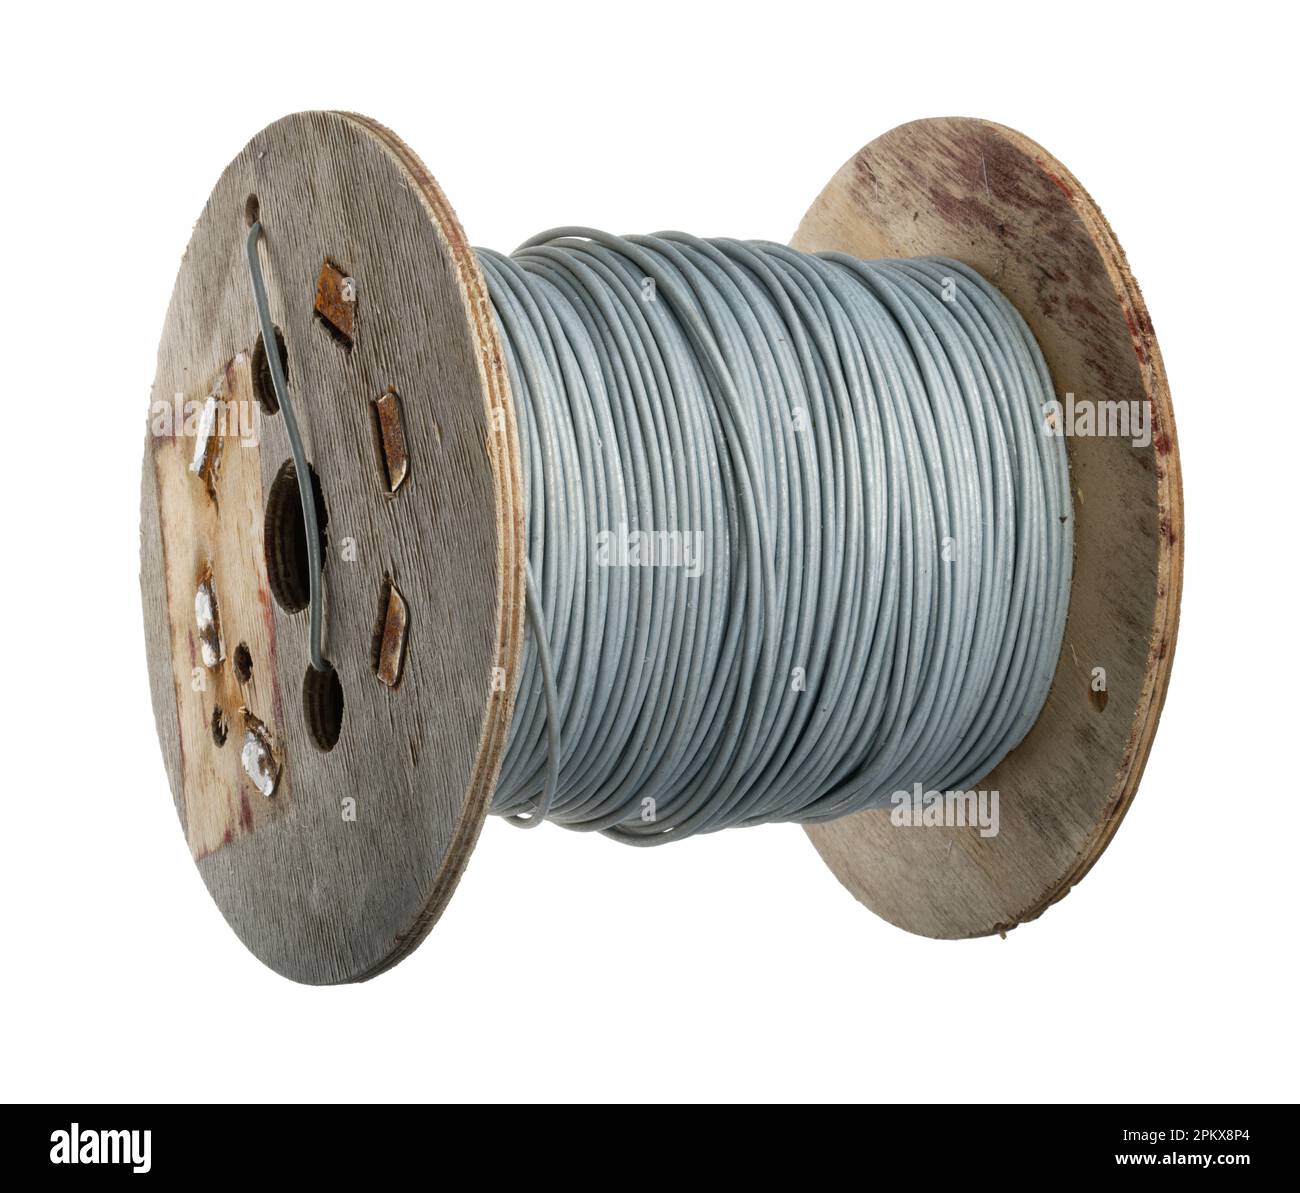 Cable reel drum Cut Out Stock Images & Pictures - Alamy